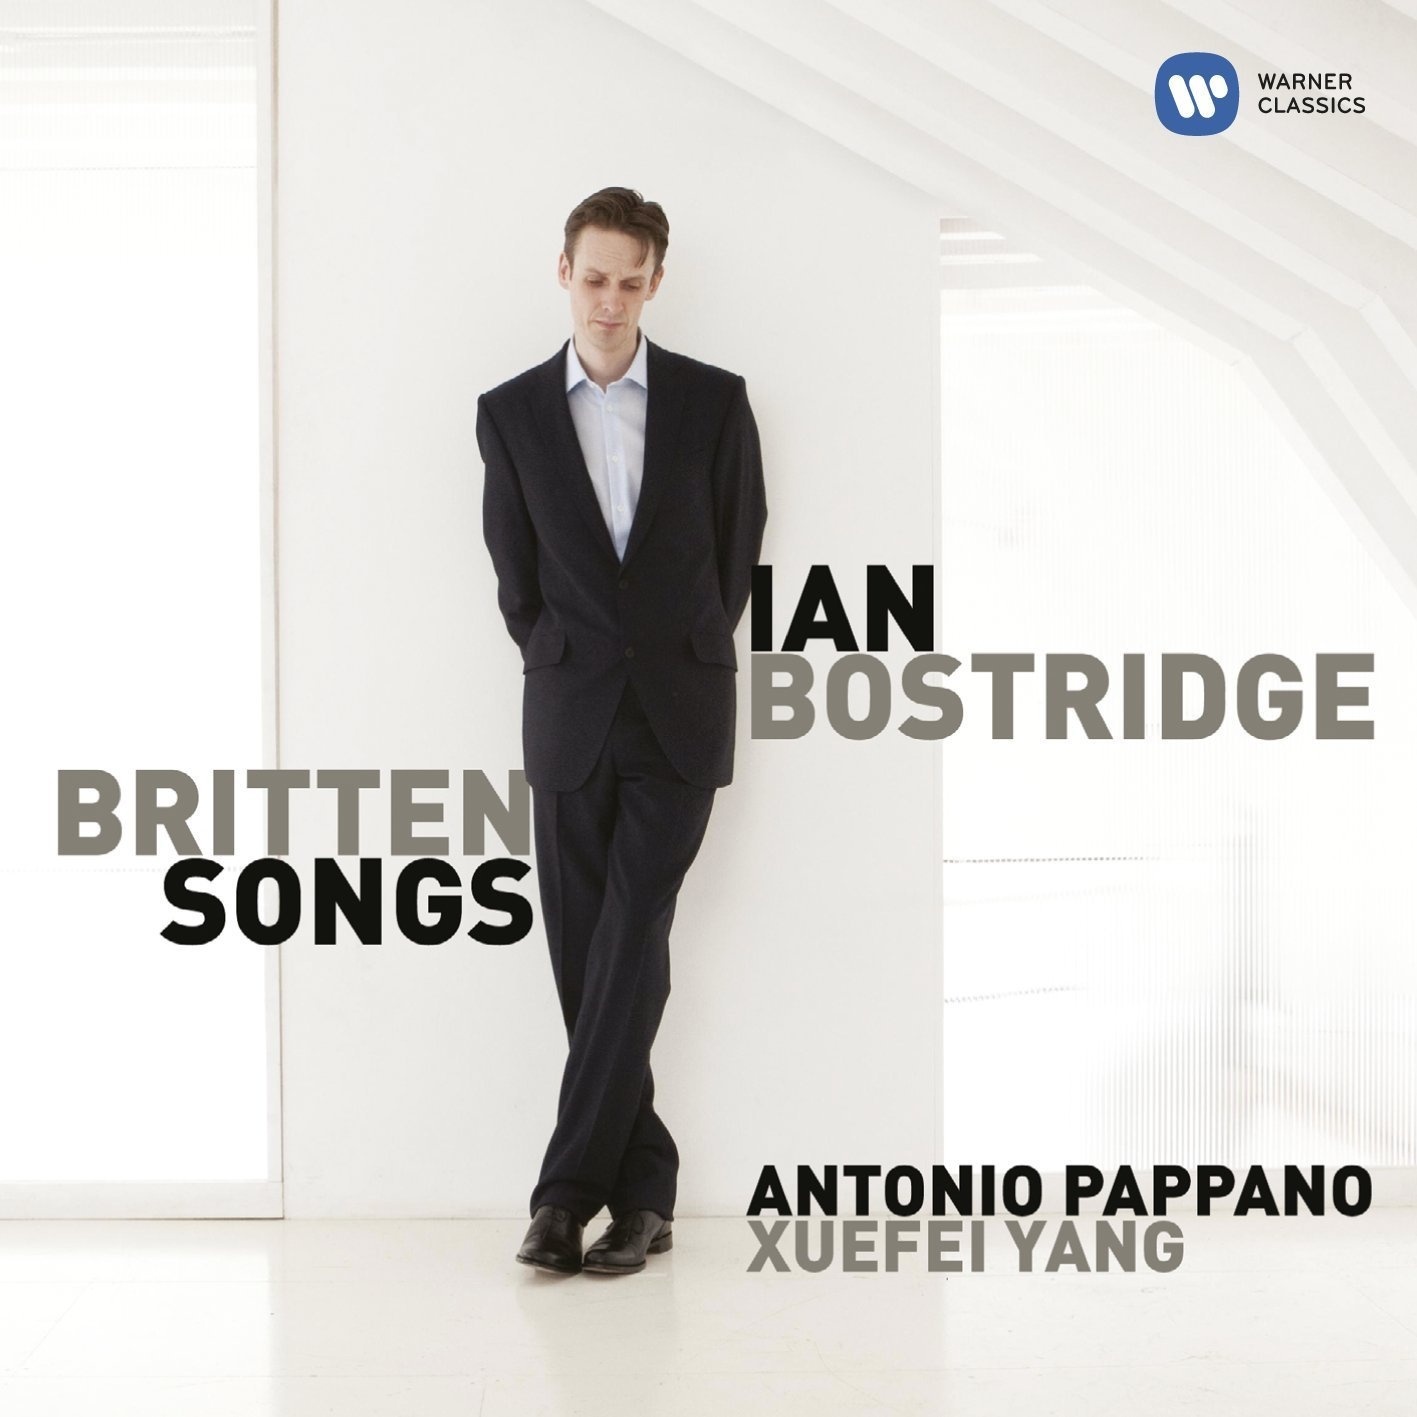 Benjamin Britten: Songs from the Chinese Op. 58 - The Autumn Wind (words: Wu-ti)